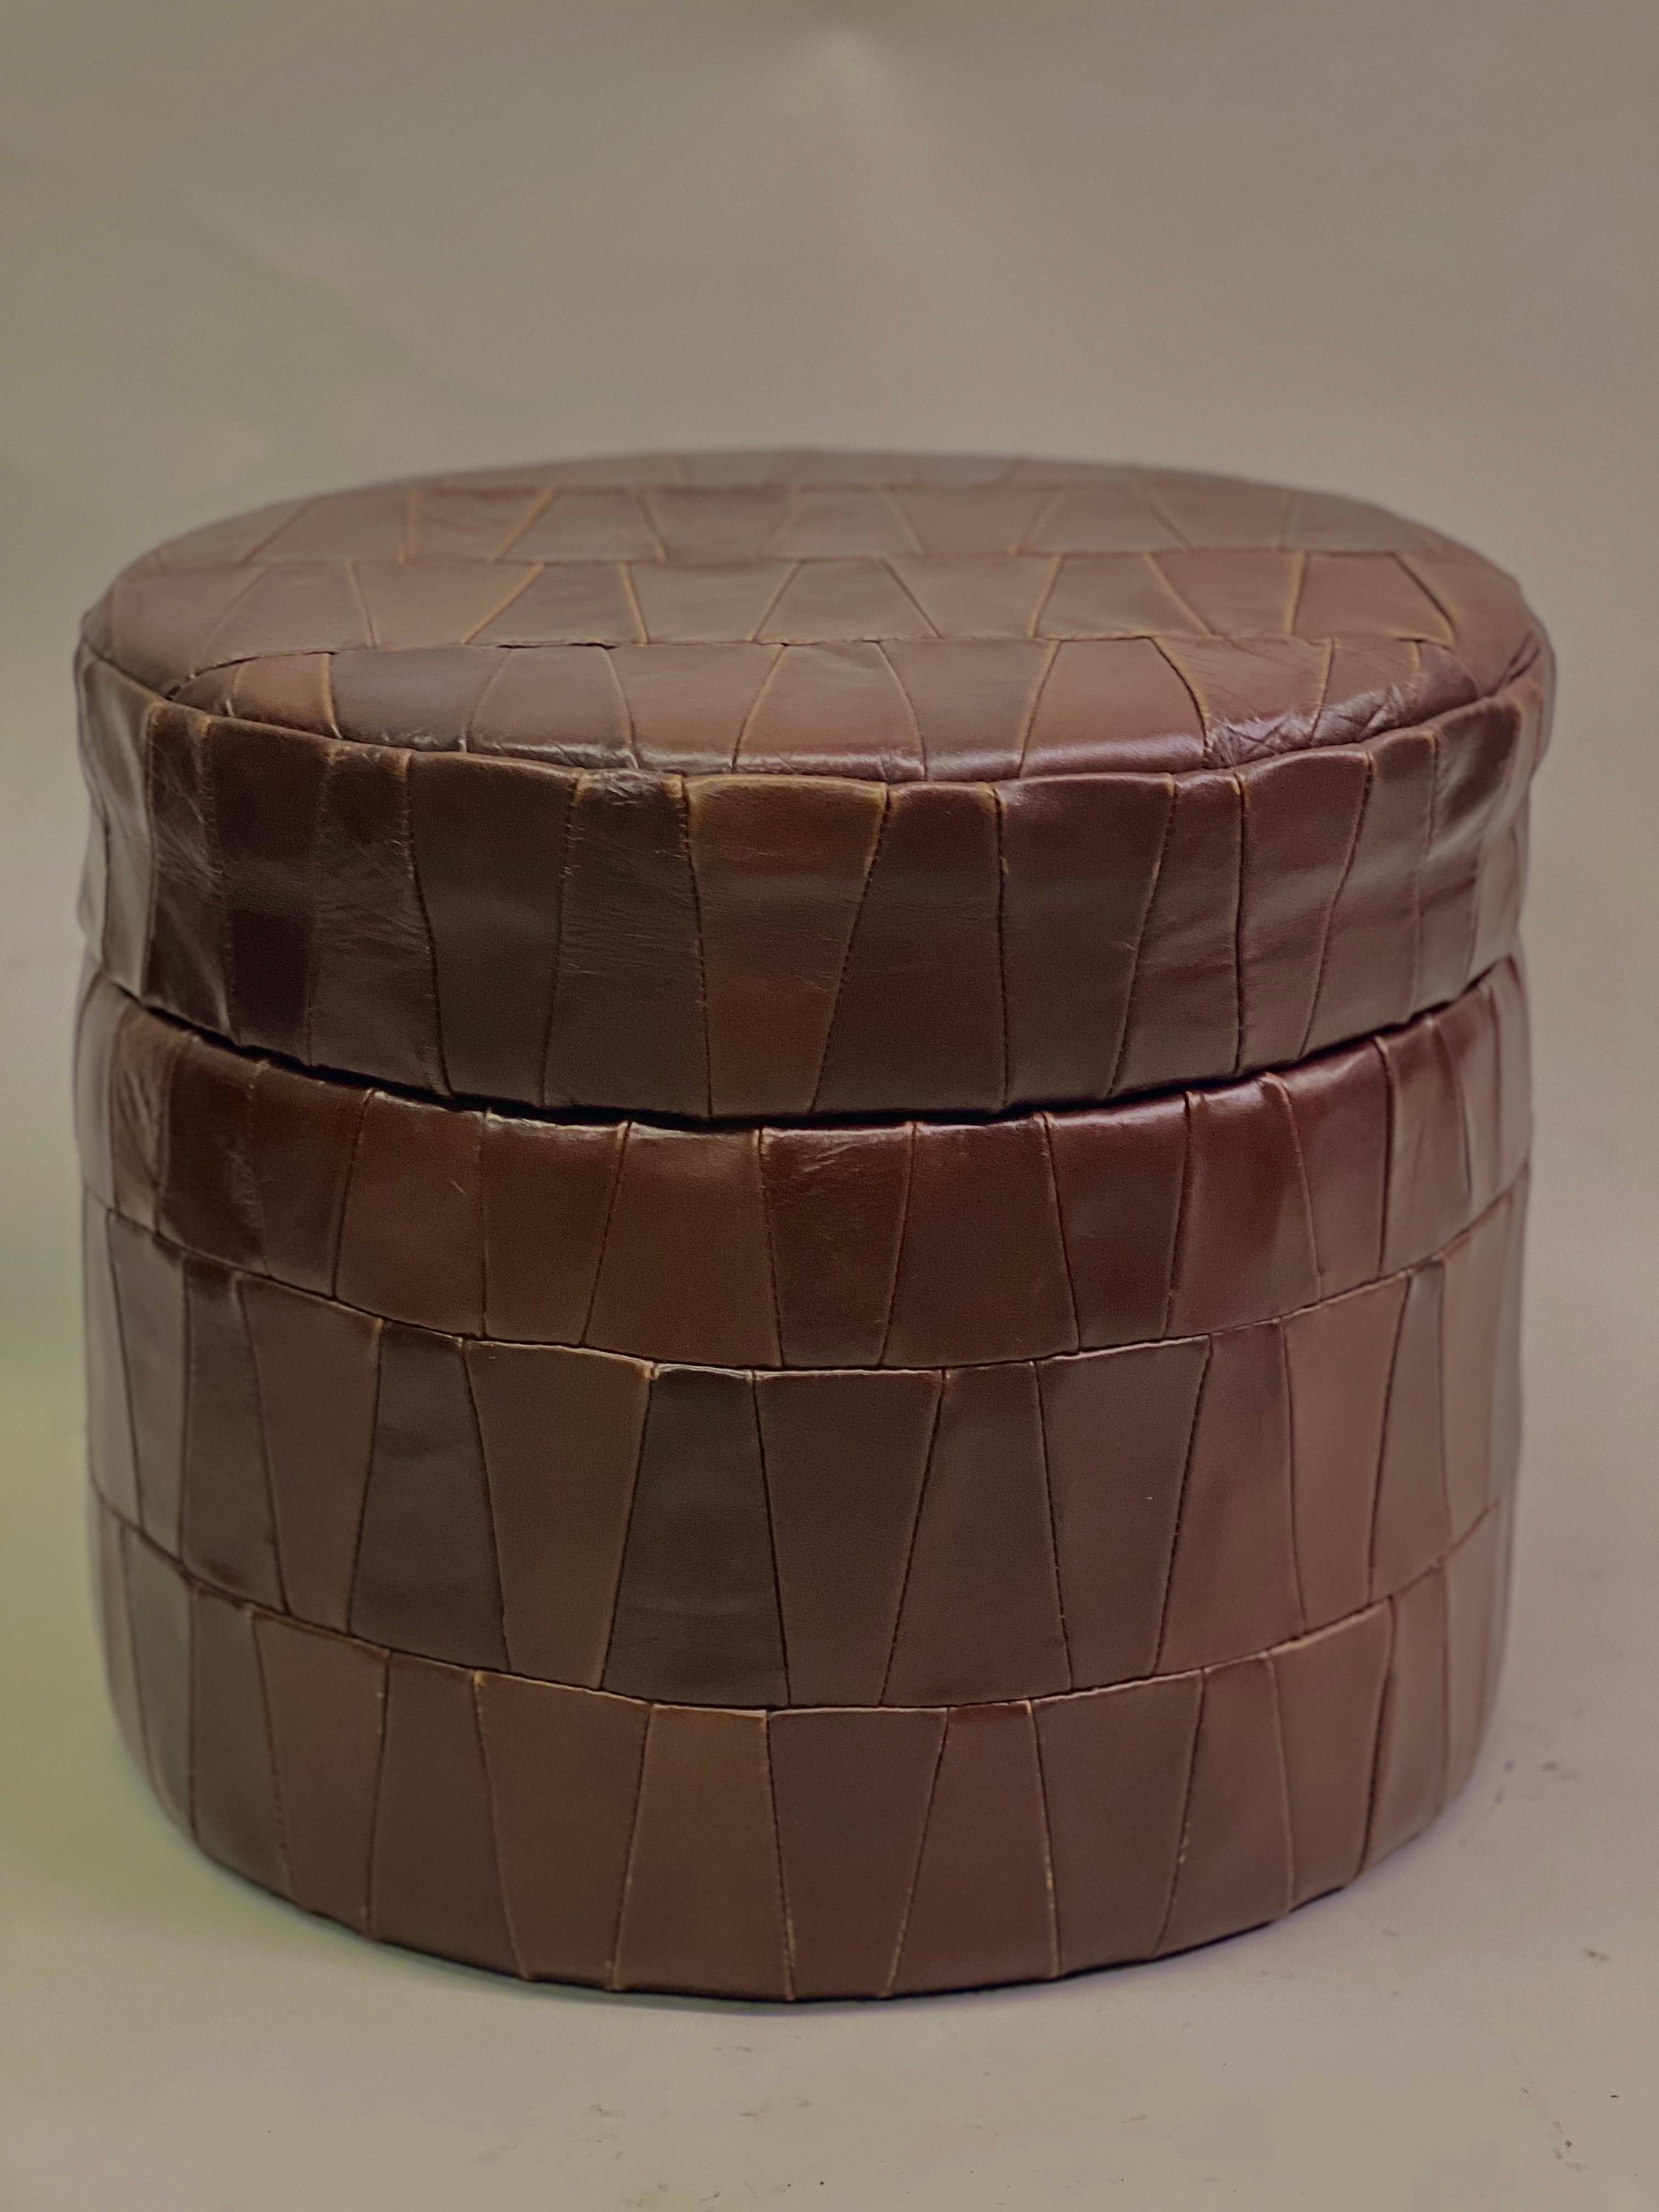 Pair of Swiss Modern Patchwork Leather Storage Ottomans/ Stools by De Sede, 1960 For Sale 8